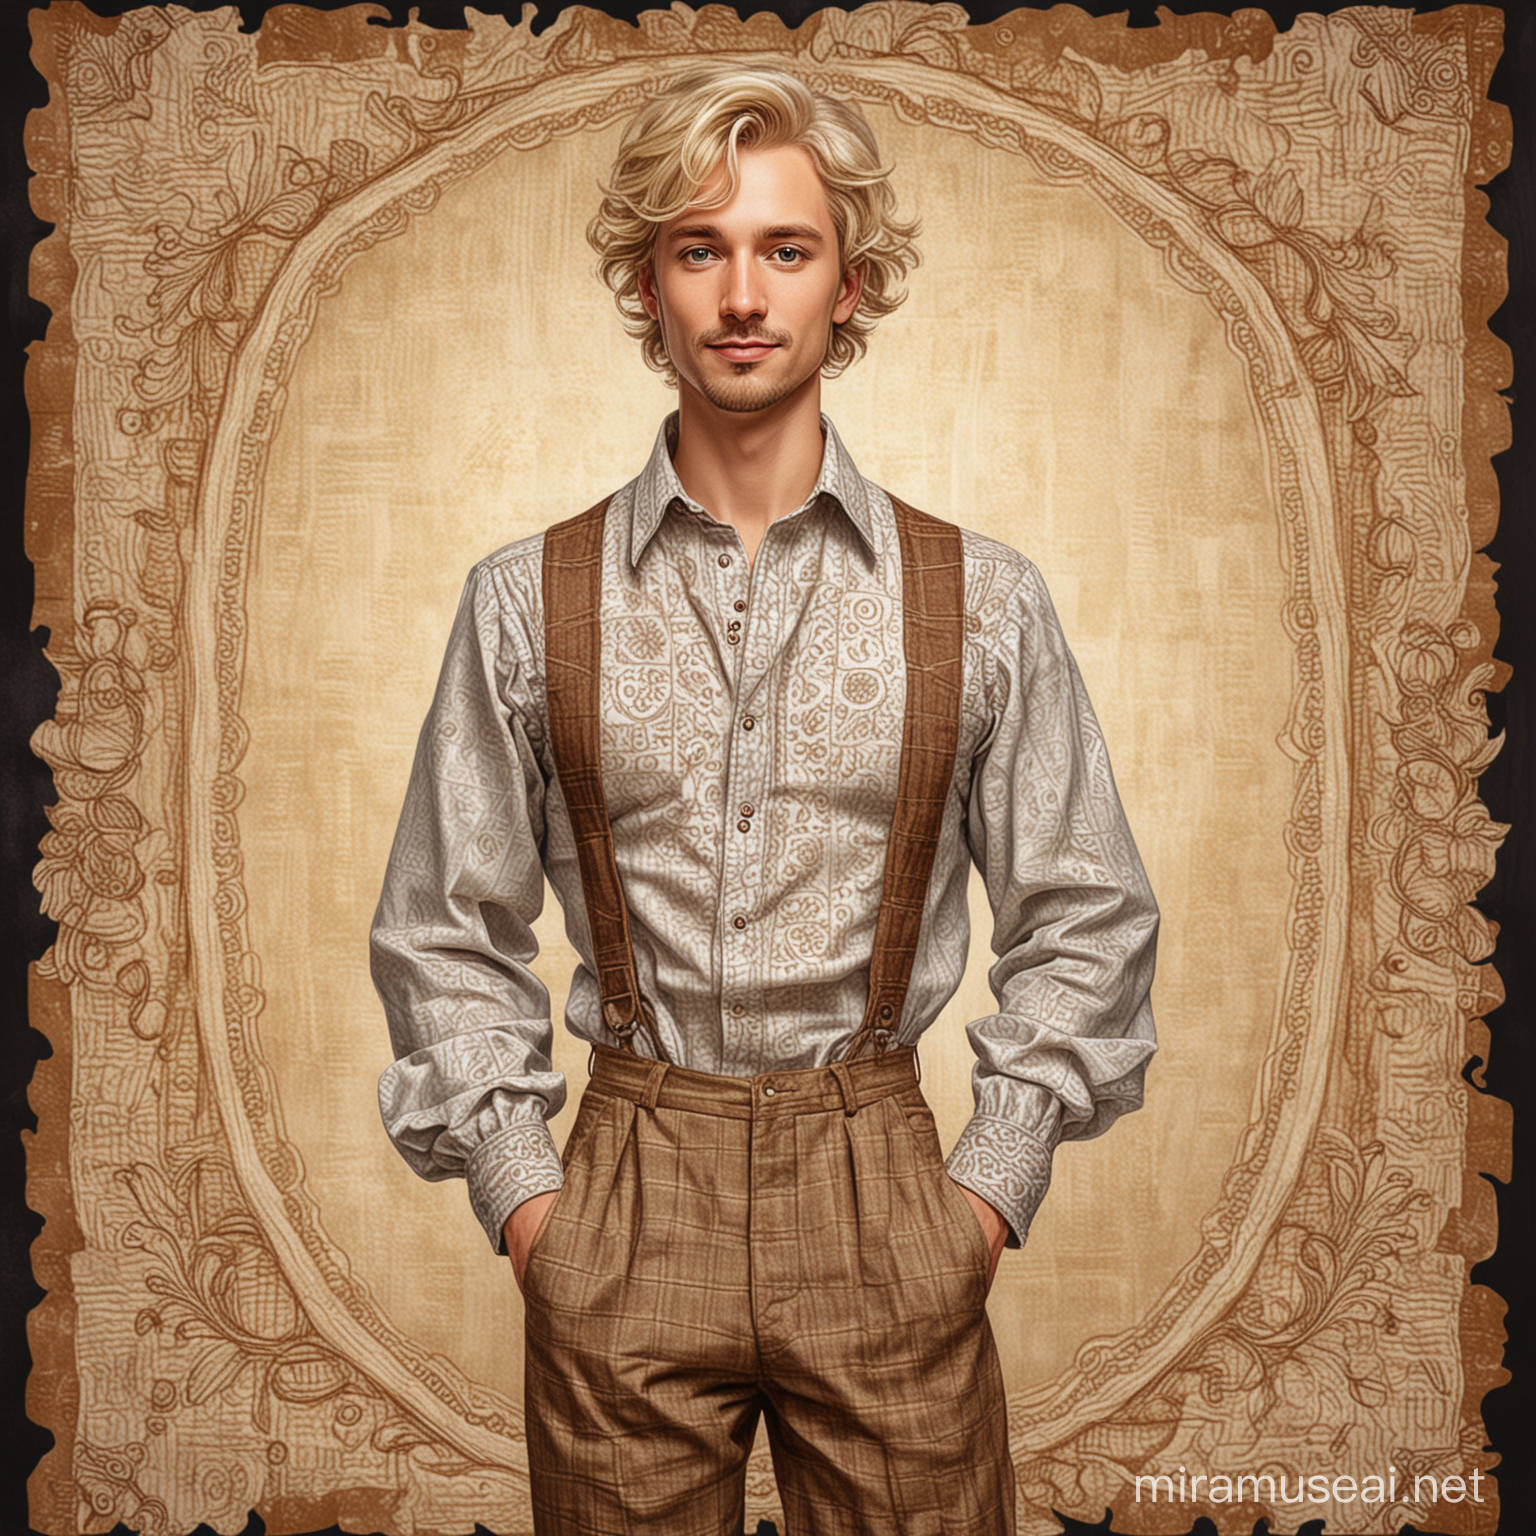 Fantasy Art Surreal 35YearOld Blond Man in Ruffled Clothes with Rare Beauty and Tyndall 9 Effect